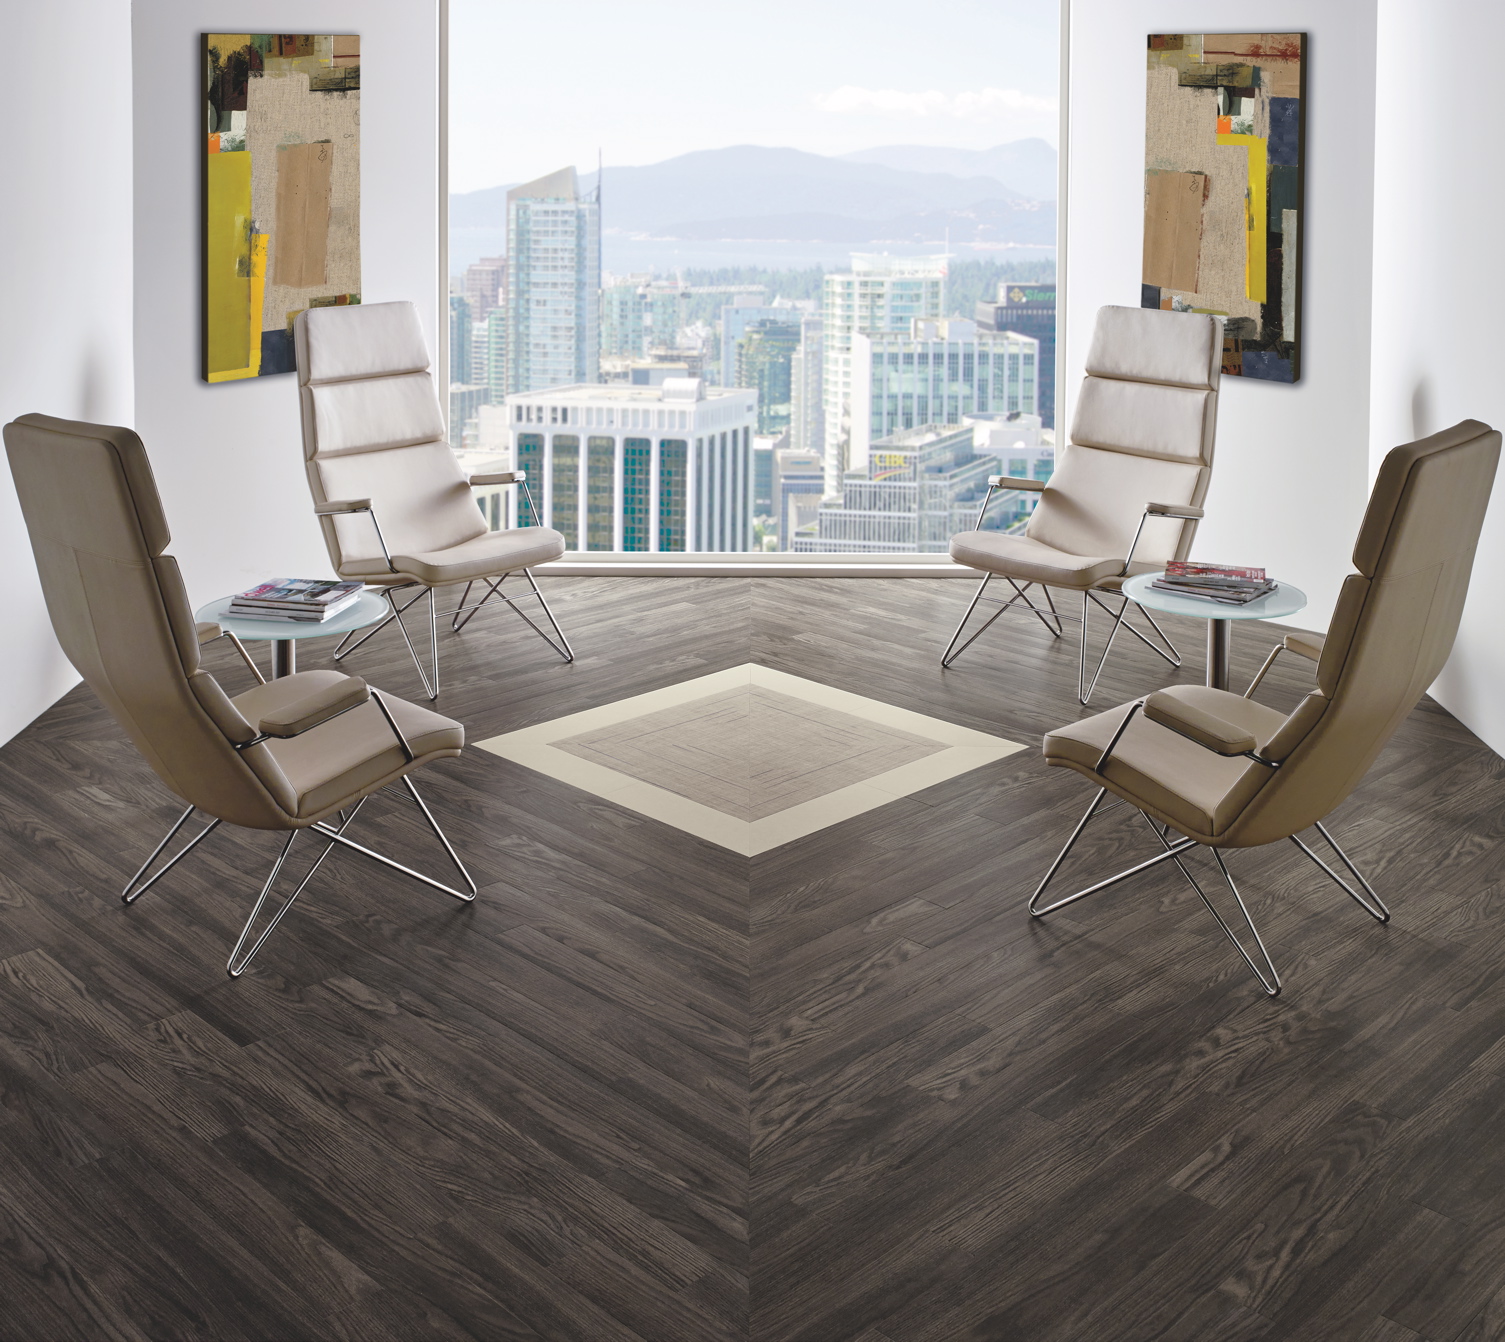 Armstrong Flooring to expand Midwest coverage - Floor Covering News